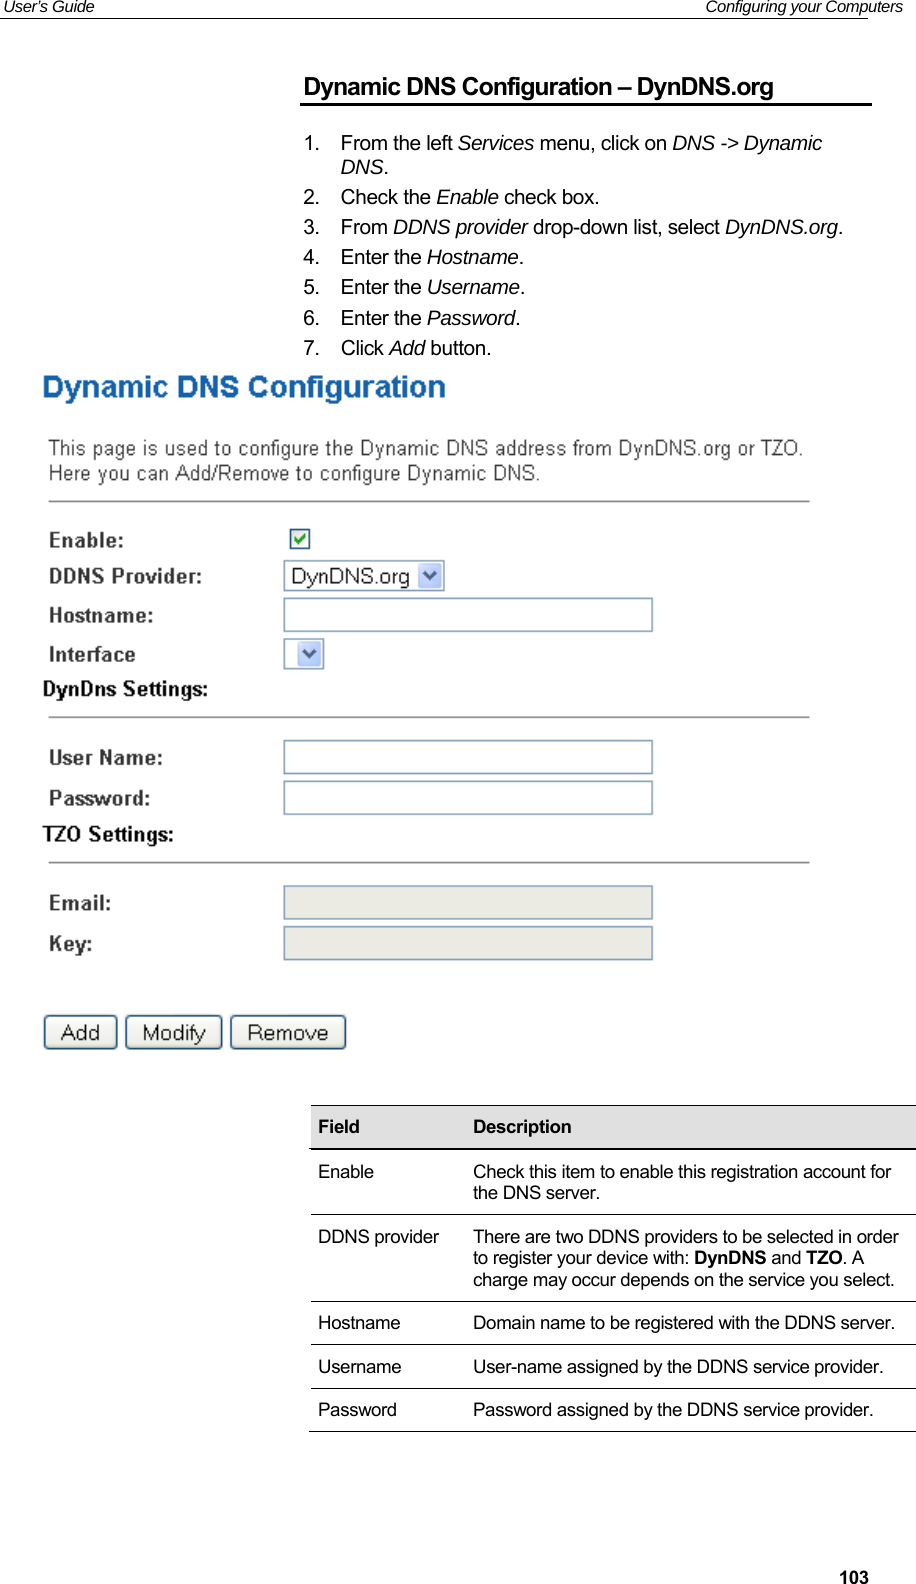 User’s Guide   Configuring your Computers  103Dynamic DNS Configuration – DynDNS.org 1.  From the left Services menu, click on DNS -&gt; Dynamic DNS. 2.  Check the Enable check box. 3.  From DDNS provider drop-down list, select DynDNS.org. 4.  Enter the Hostname. 5.  Enter the Username. 6.  Enter the Password. 7.  Click Add button.                Field  Description Enable  Check this item to enable this registration account for the DNS server. DDNS provider  There are two DDNS providers to be selected in order to register your device with: DynDNS and TZO. A charge may occur depends on the service you select. Hostname  Domain name to be registered with the DDNS server. Username  User-name assigned by the DDNS service provider. Password  Password assigned by the DDNS service provider. 